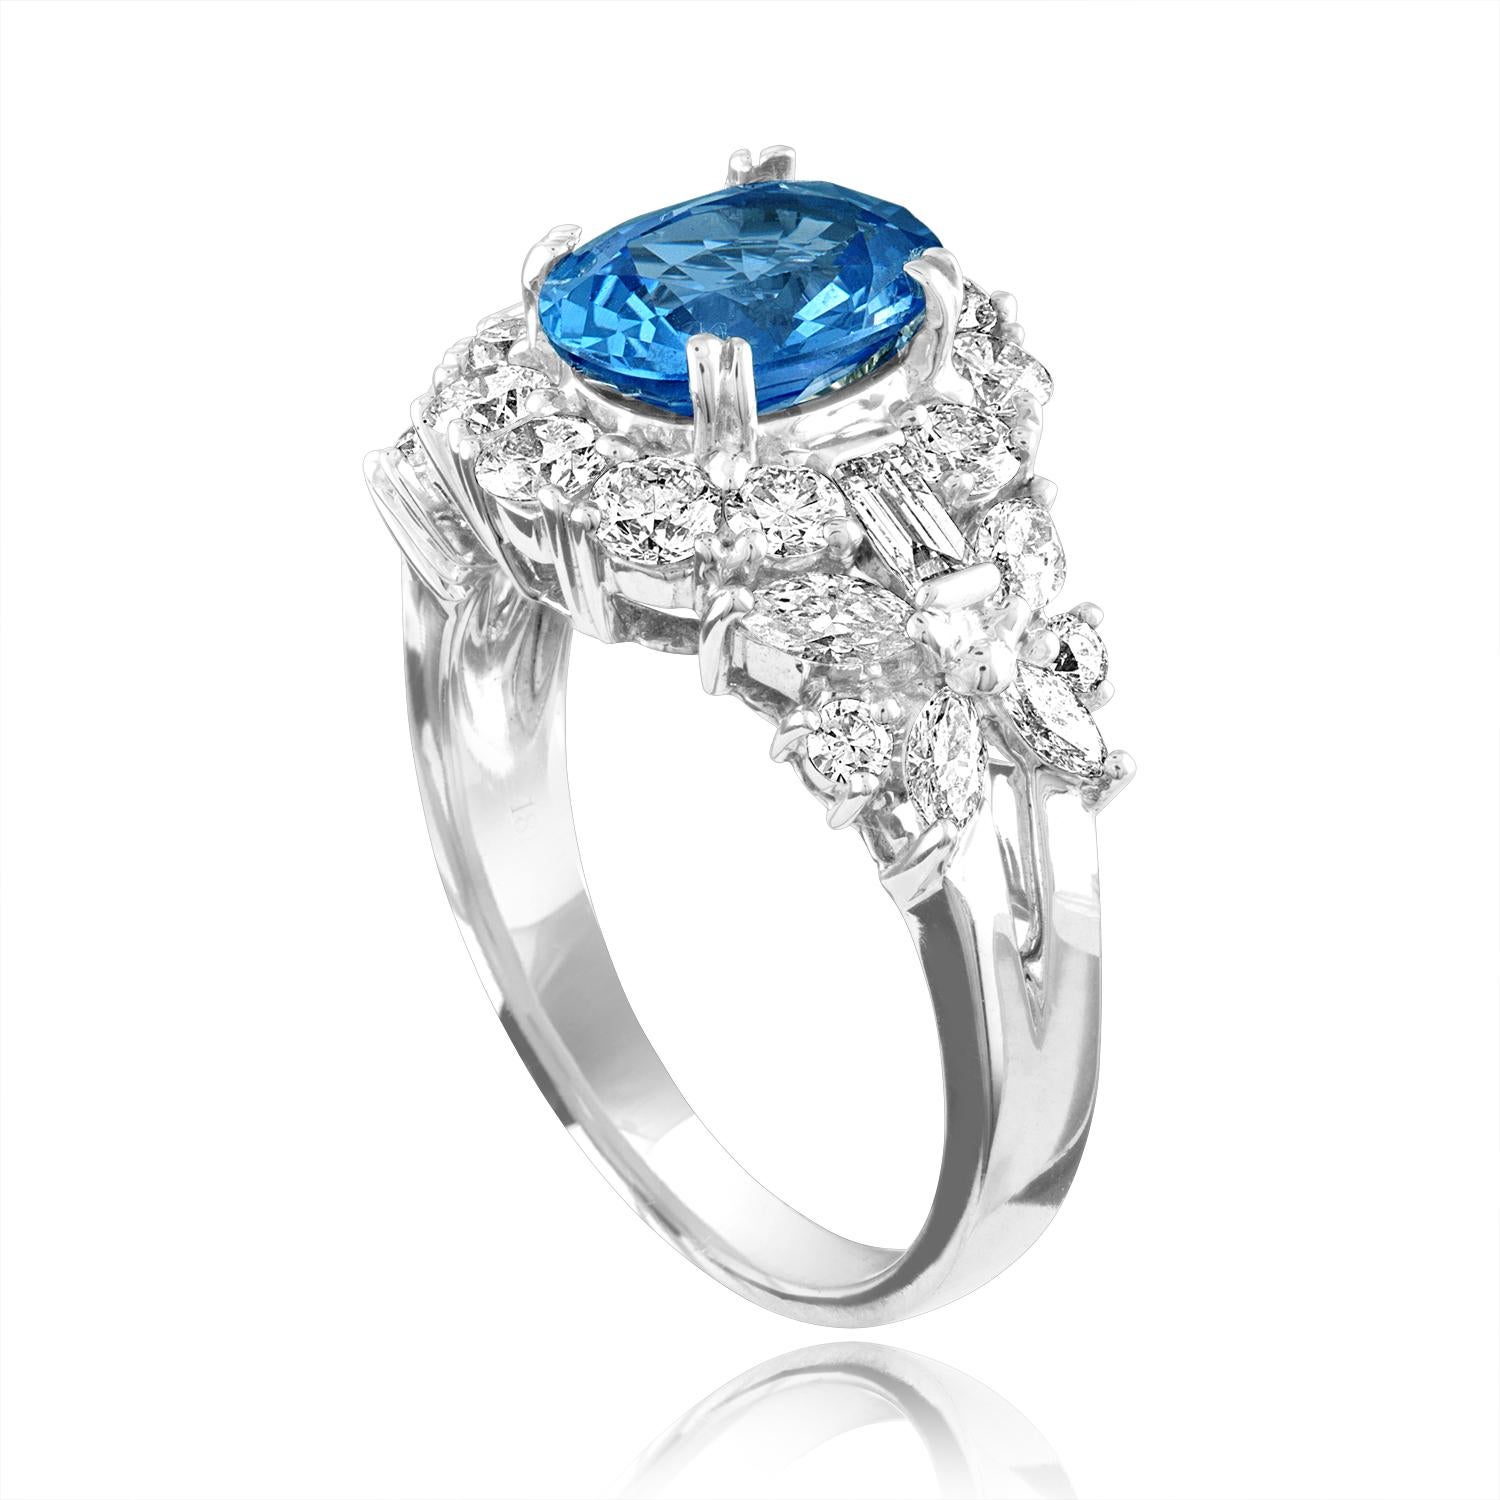 Beautifully Diamond Encrusted Oval Blue Sapphire Ring
The ring is 18K White Gold
The center stone is an oval 2.38 Carat Blue Sapphire
The Sapphire is GIA certified HEATED
There are 1.44 Carats in Diamonds F/G VS/SI
The ring is a size 6.5